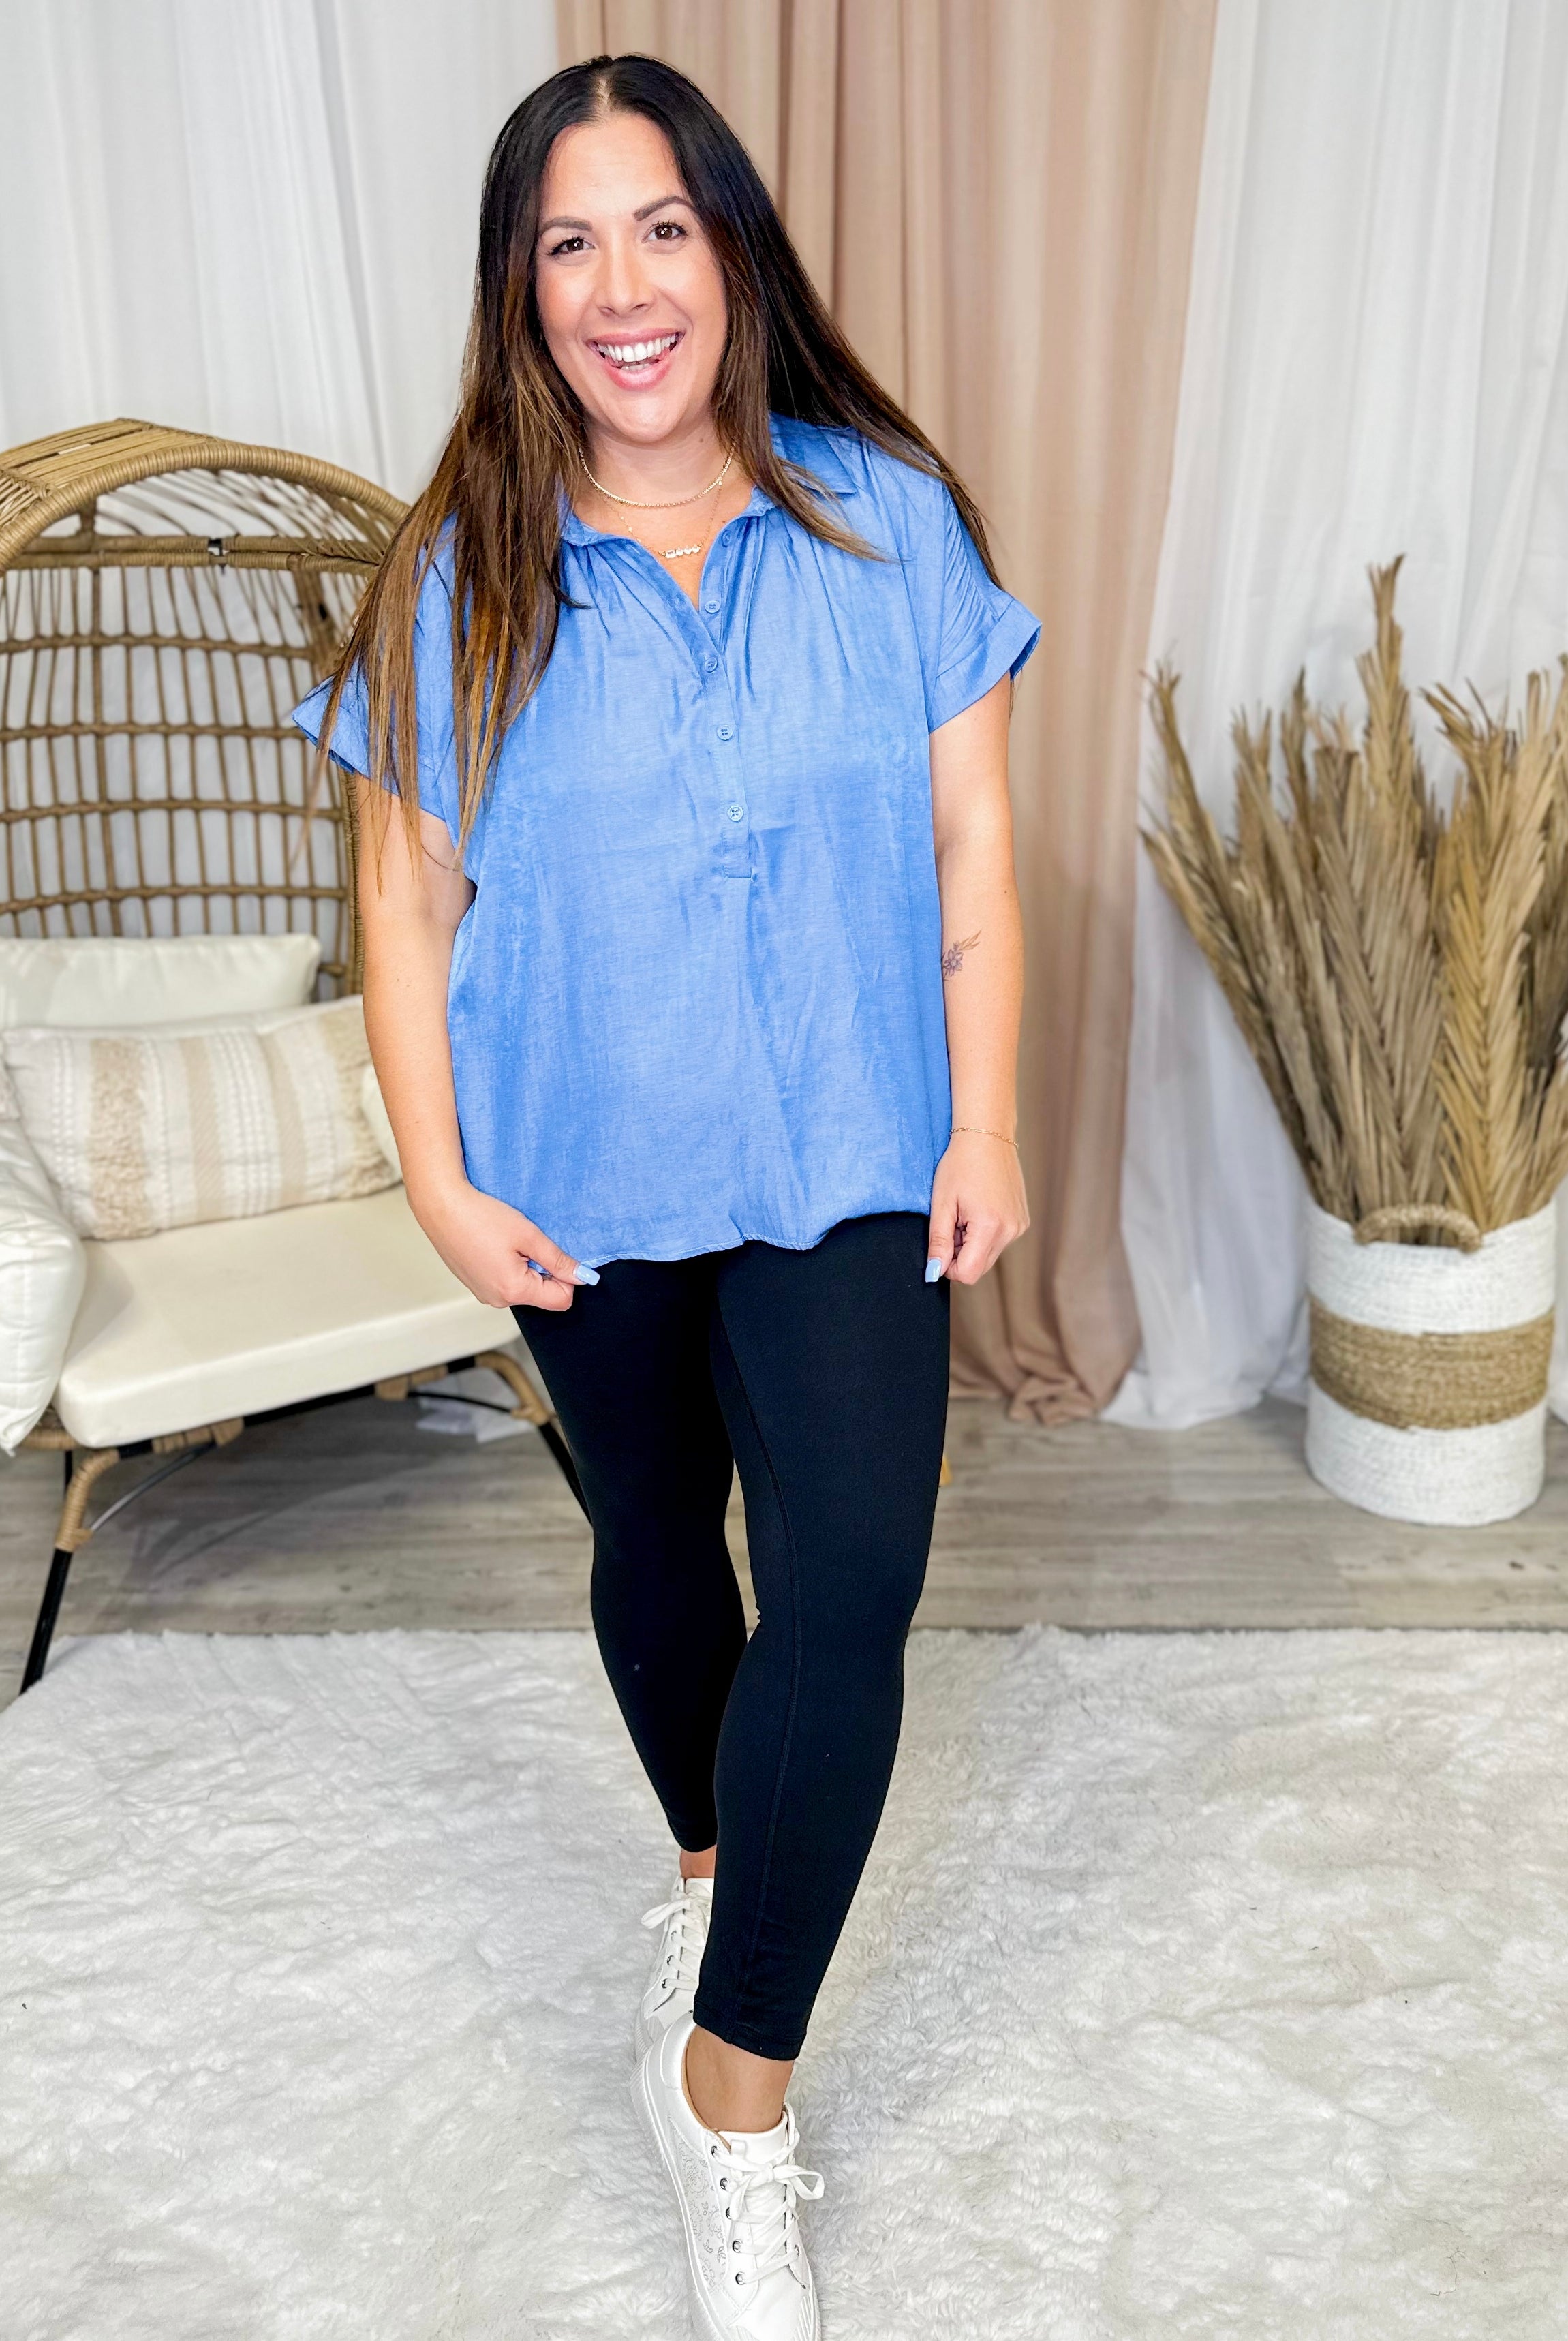 Picture Perfect Top-110 Short Sleeve Top-First Love-Heathered Boho Boutique, Women's Fashion and Accessories in Palmetto, FL